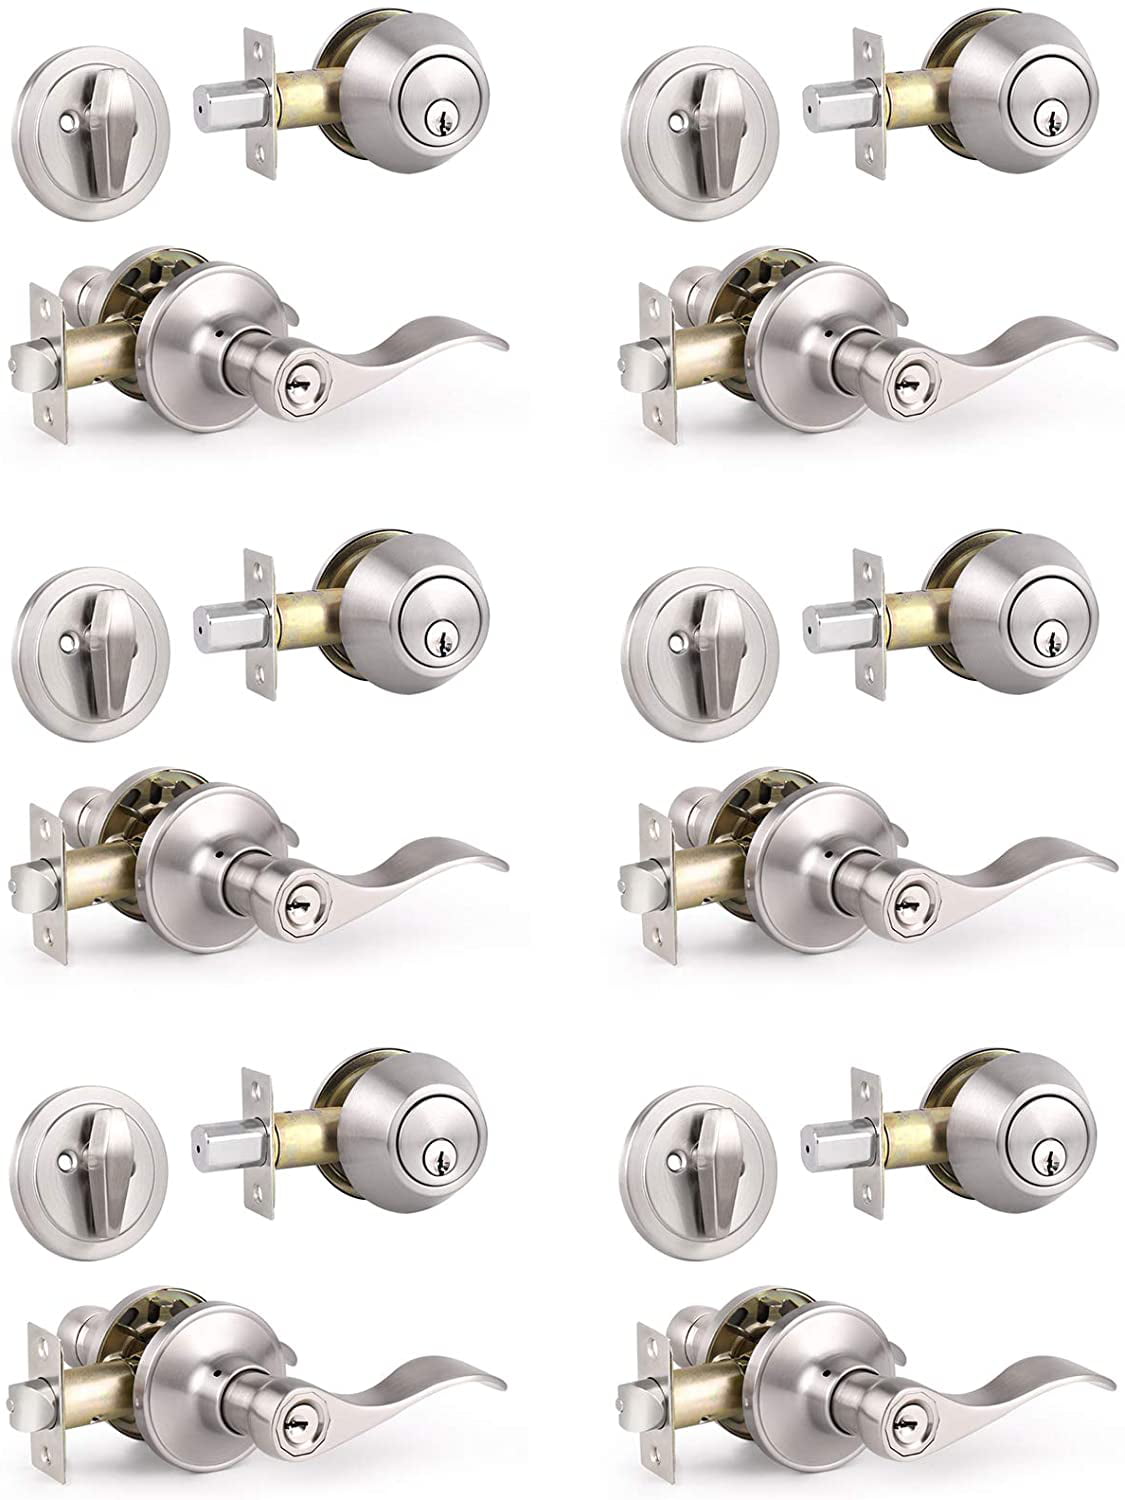 Wave Style Door Lever Lockset for Entrance Front Bed/Bath Doors 6 Pack Entry Lock with Single Cylinder Handleset Satin Nickel Keyed Alike Combo Pack